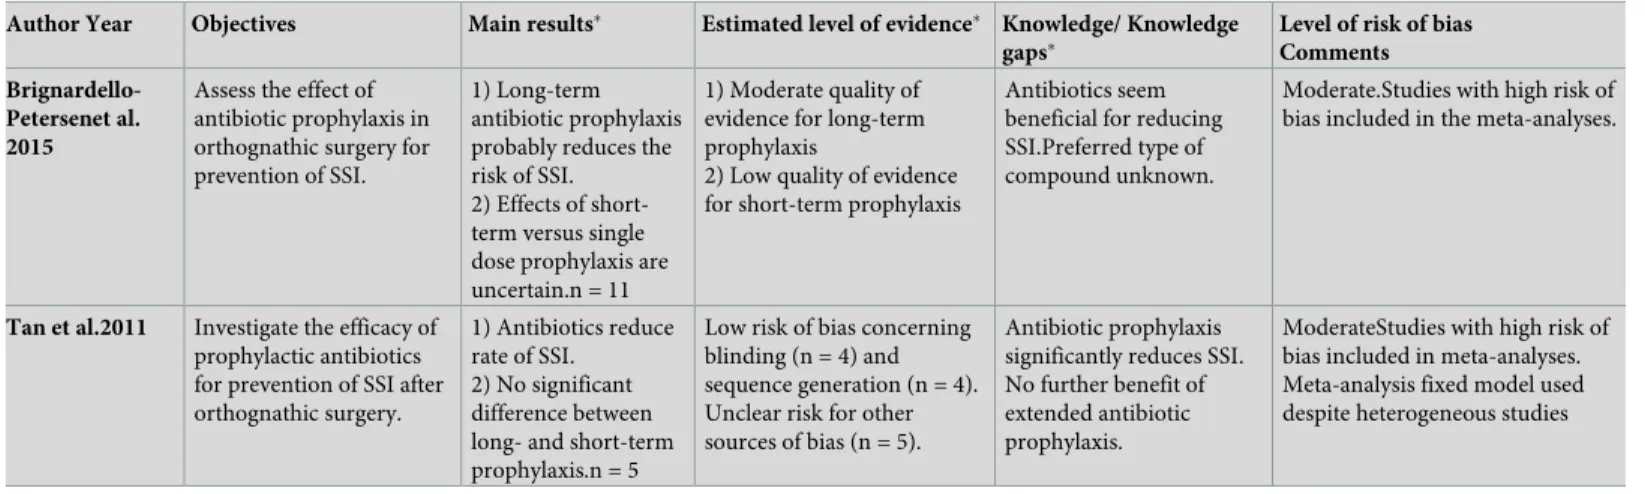 Table 6. Systematic reviews at moderate risk of bias.